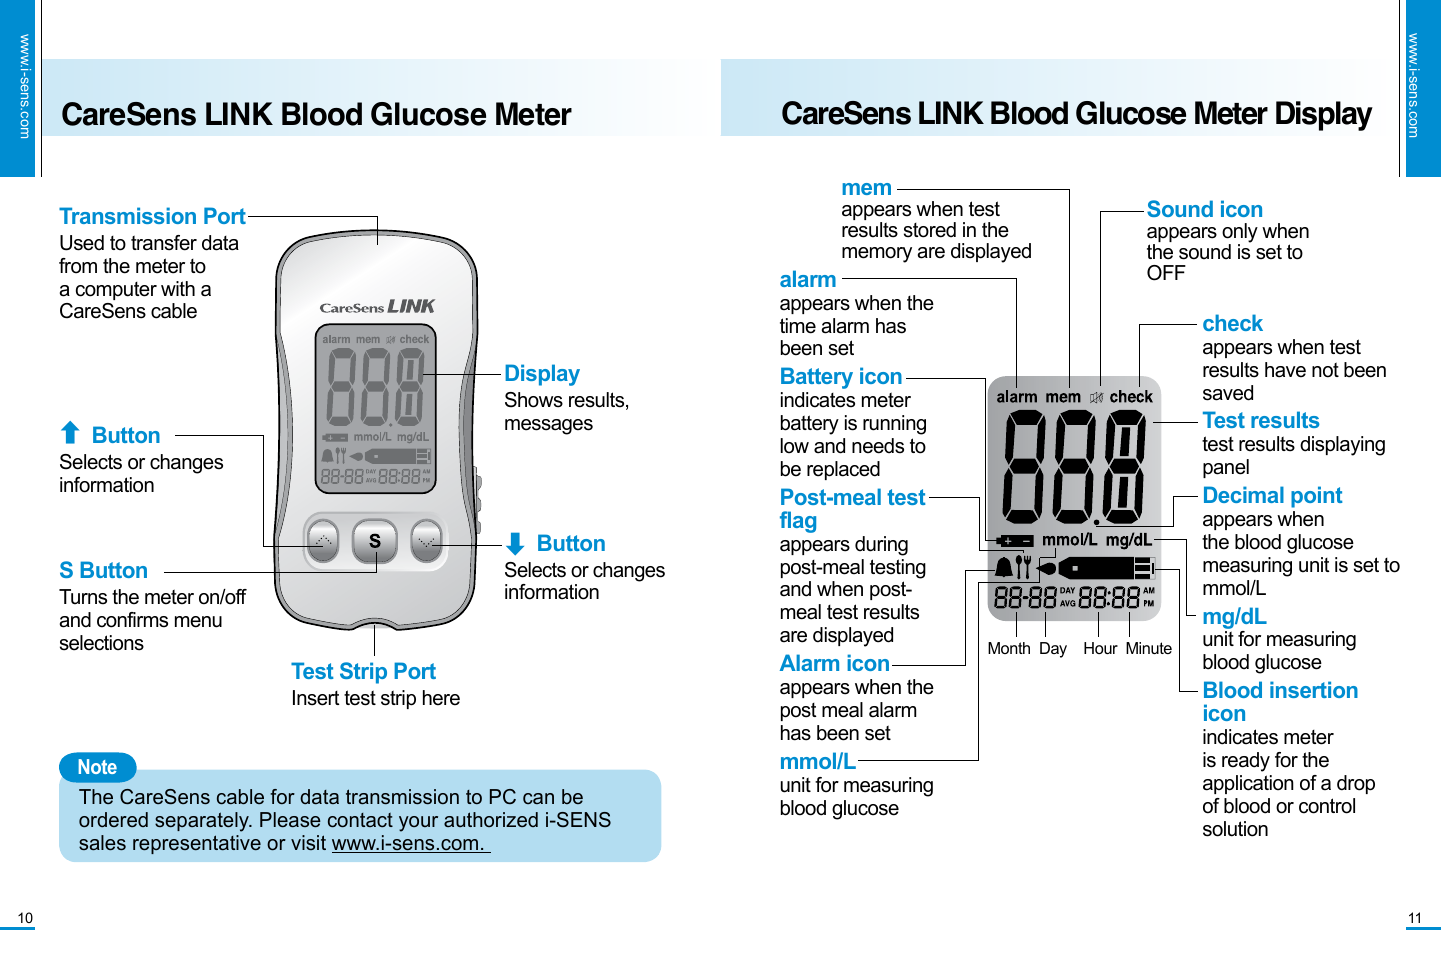 www.i-sens.com11CareSens LINK Blood Glucose Meter Displaymemappears when test results stored in the memory are displayedMonth  Day    Hour  Minutealarmappears when the time alarm has been set Battery iconindicates meter battery is running low and needs to be replacedPost-meal test flagappears during post-meal testing and when post-meal test results are displayedAlarm iconappears when the post meal alarm has been set mmol/Lunit for measuring blood glucose checkappears when test results have not been saved Test resultstest results displaying panelDecimal pointappears when the blood glucose measuring unit is set to mmol/Lmg/dLunit for measuring blood glucose  Blood insertion iconindicates meter is ready for the application of a drop of blood or control solution Sound iconappears only when the sound is set to OFFwww.i-sens.com10CareSens LINK Blood Glucose MeterTransmission PortUsed to transfer data from the meter to a computer with a CareSens cableDisplayShows results, messagesTest Strip PortInsert test strip here󰦛 ButtonSelects or changes information 󰦜 ButtonSelects or changes information S ButtonTurns the meter on/off and confirms menu selectionsThe CareSens cable for data transmission to PC can be ordered separately. Please contact your authorized i-SENS sales representative or visit www.i-sens.com. Note